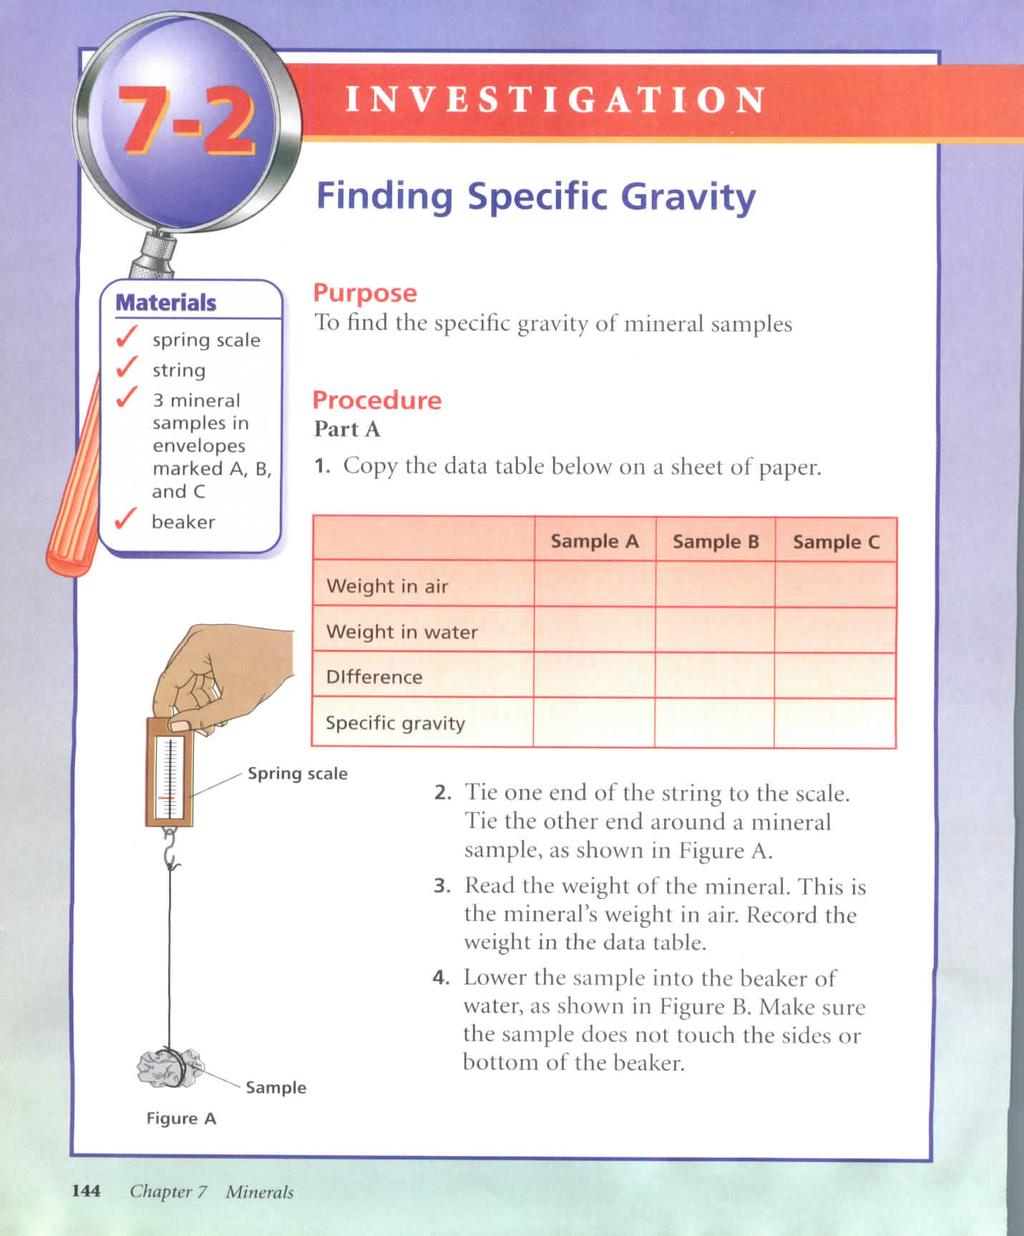 INVESTIGATION Finding Specific Gravity Materials */ spring scale V string 3 mineral samples in envelopes marked A, B, and C V beaker Purpose To find the specific gravity of mineral samples Procedure